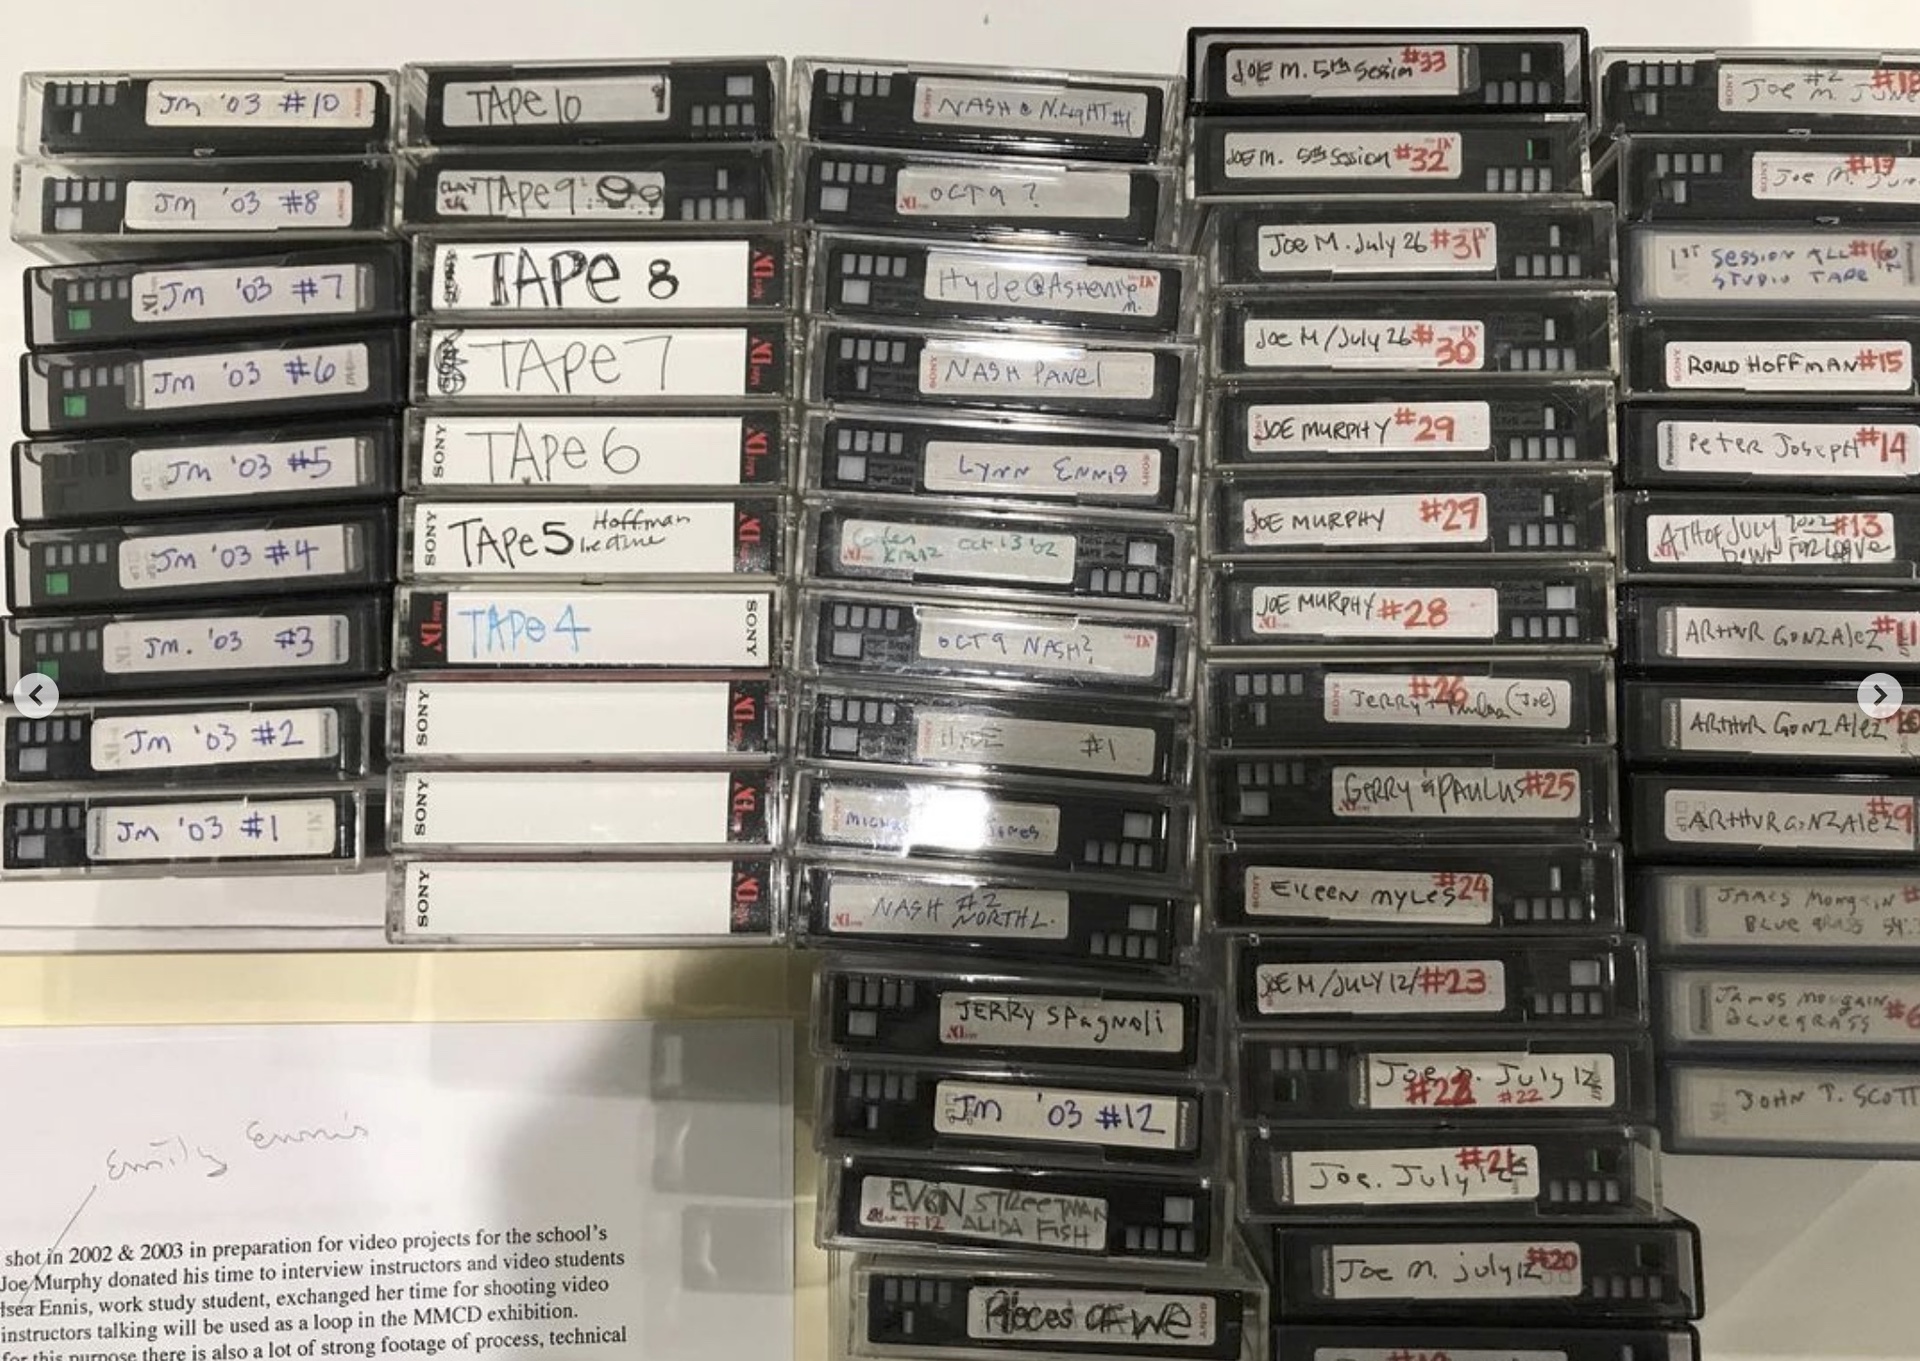 8mm digital video tapes in the Penland archives. Image courtesy of Penland School of Craft.